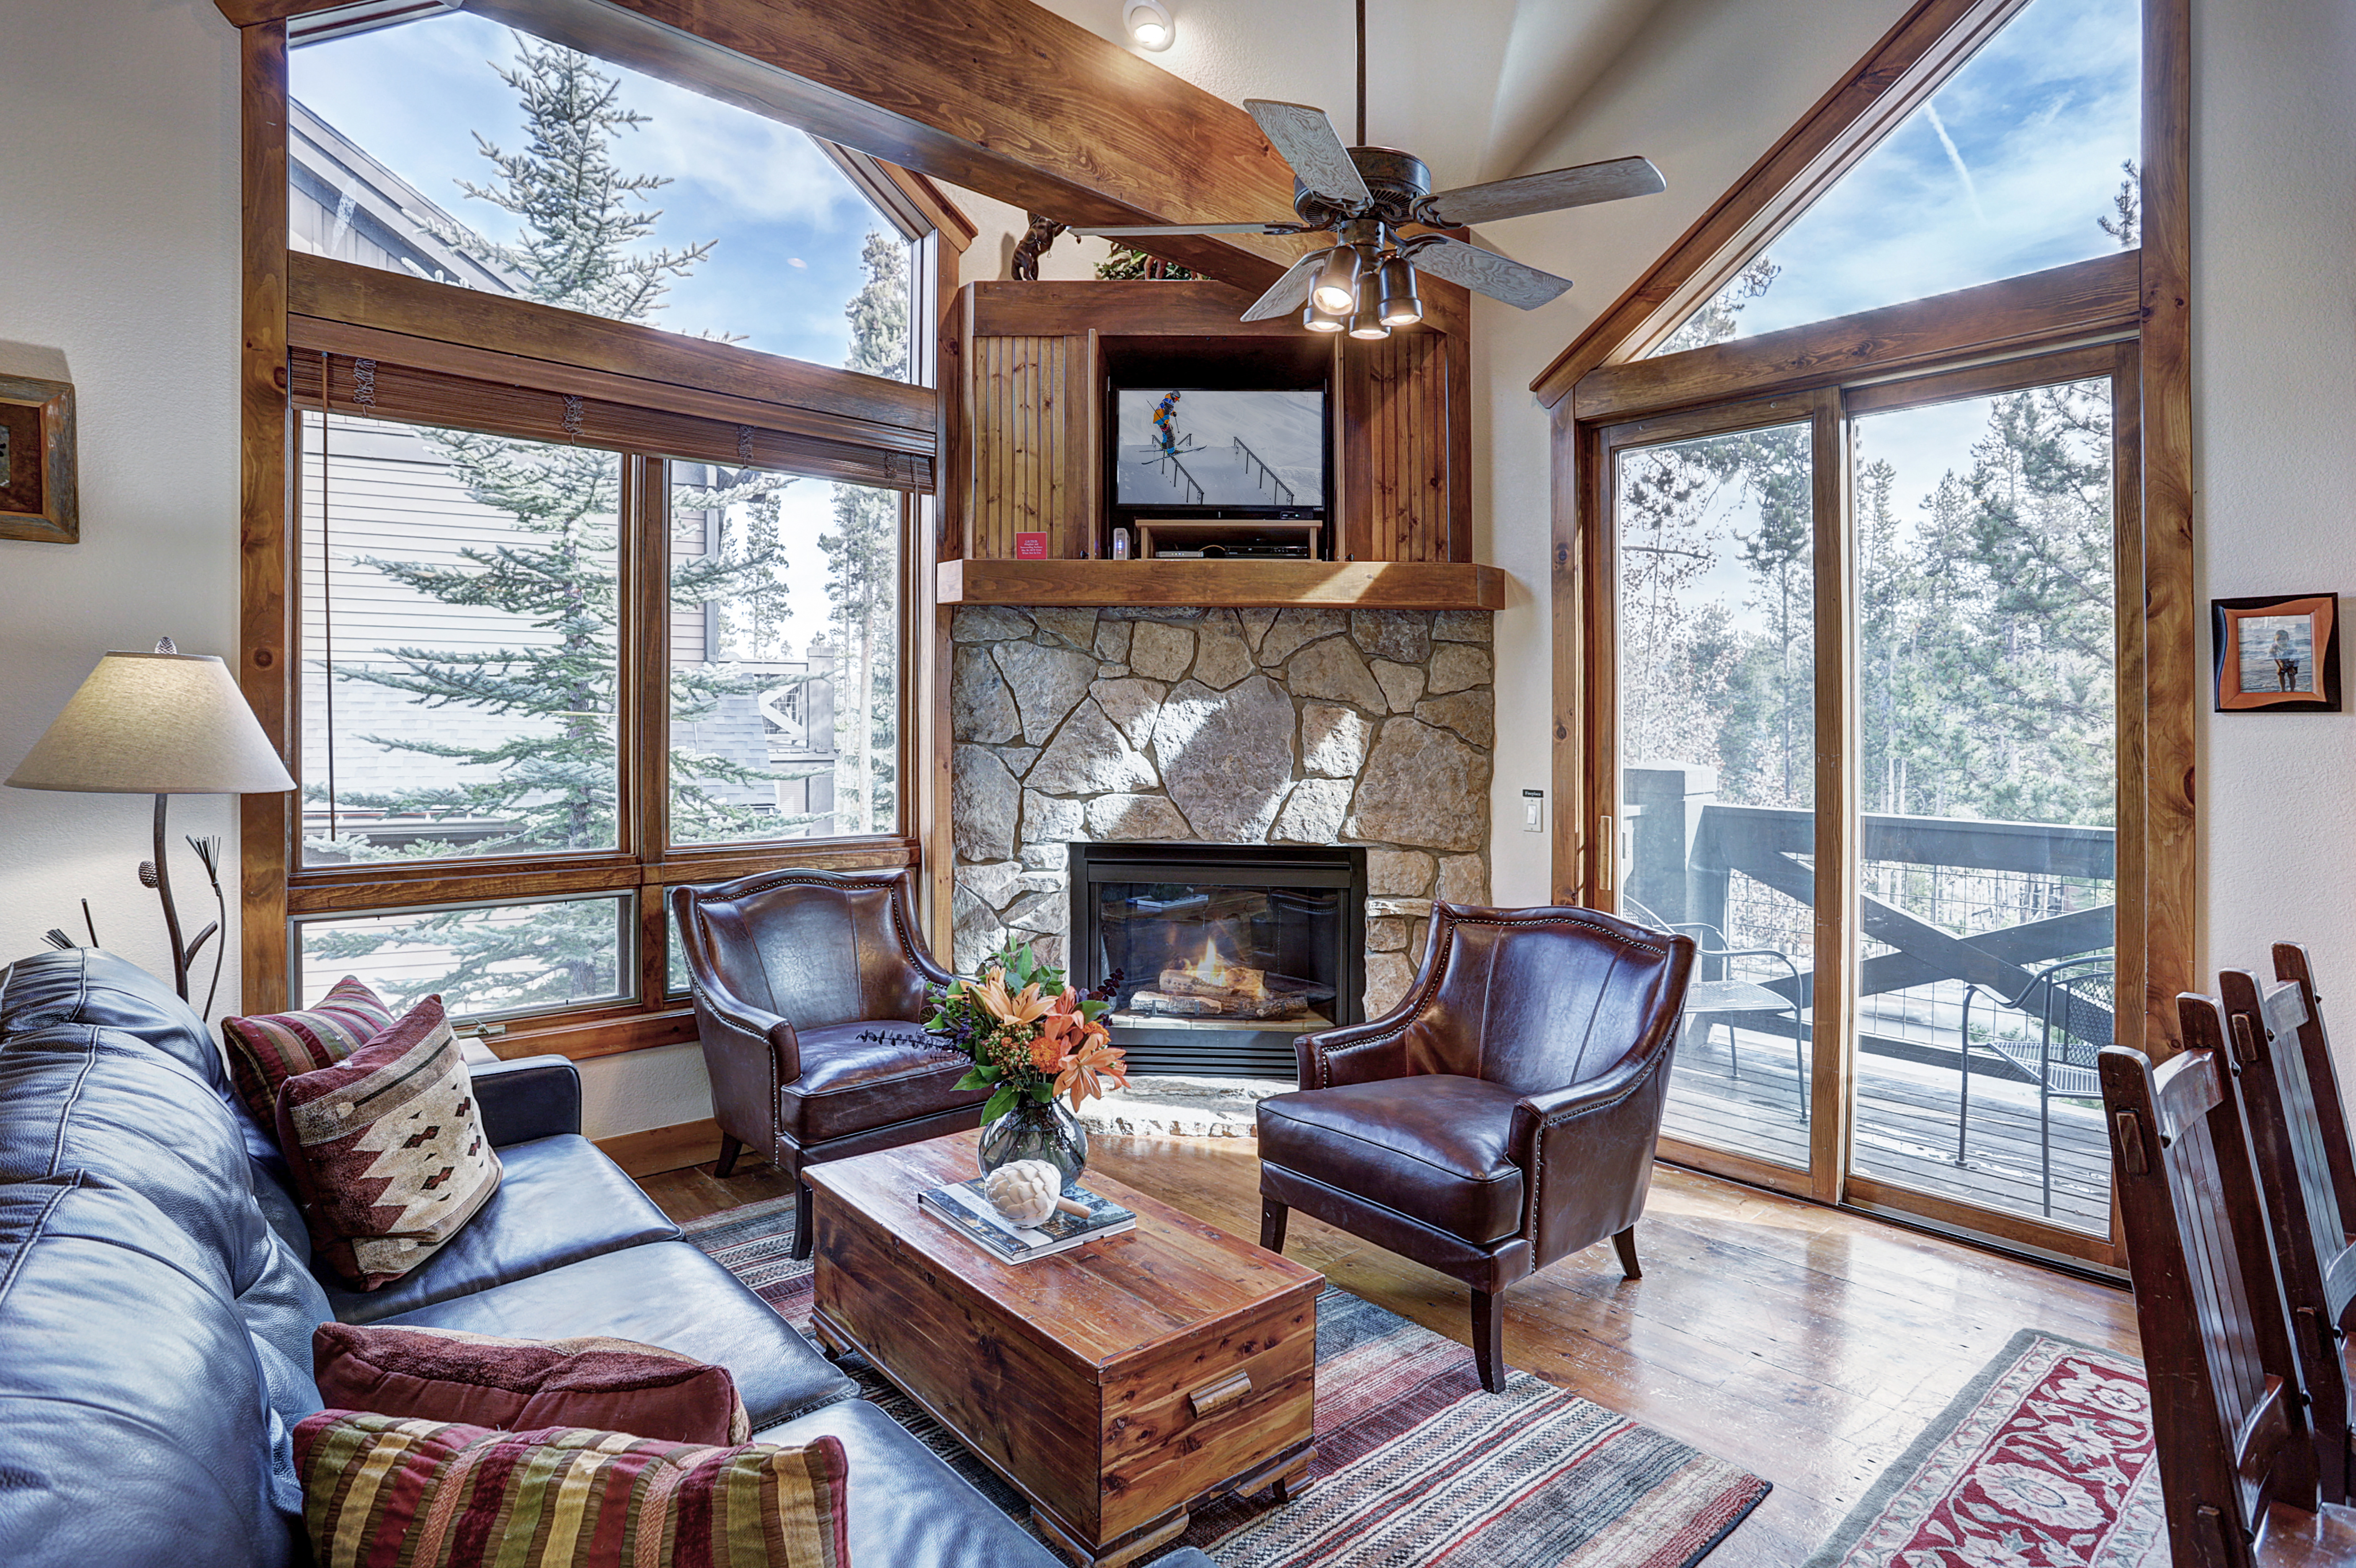 These gorgeous large windows bring a lot of natural light into the living area - Amber Sky Breckenridge Vacation Rental